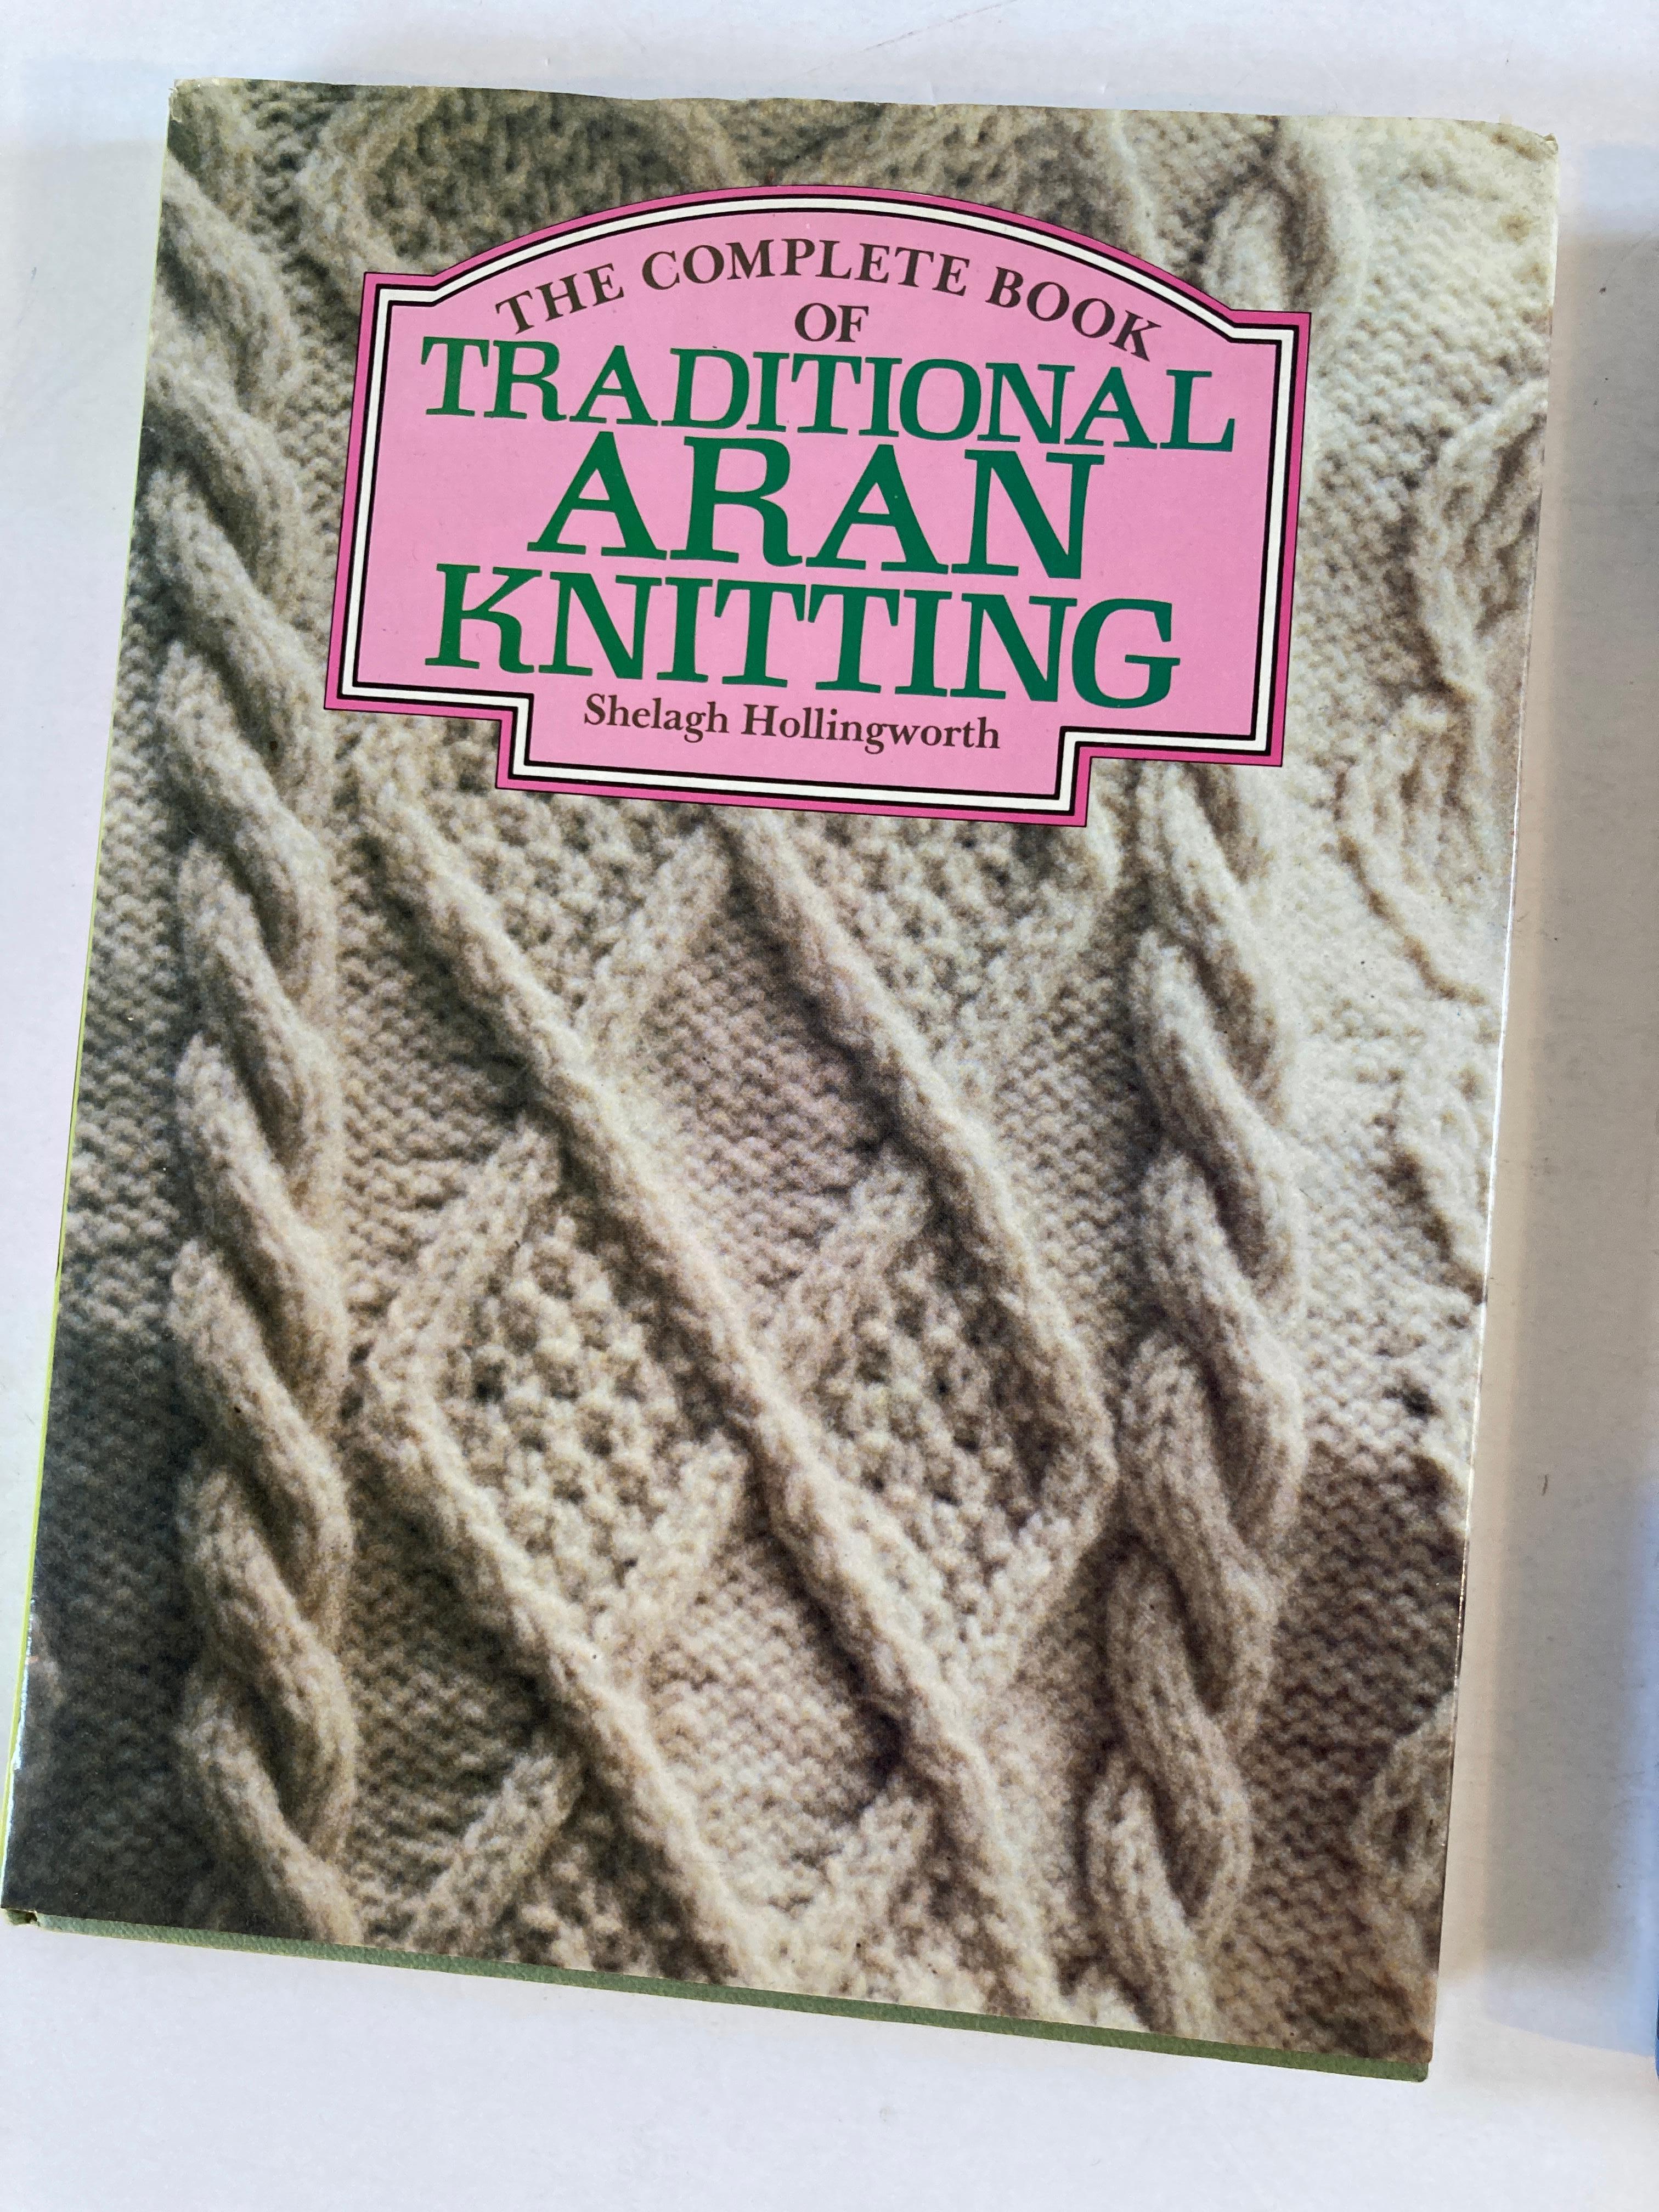 The Complete book of traditional Aran knitting Book by Shelagh Hollingworth.
Collects patterns for knitting shirts, sweaters, jackets, coats, and other clothes in the style of the Aran Islands.
Originally published: 1982
Author: Shelagh